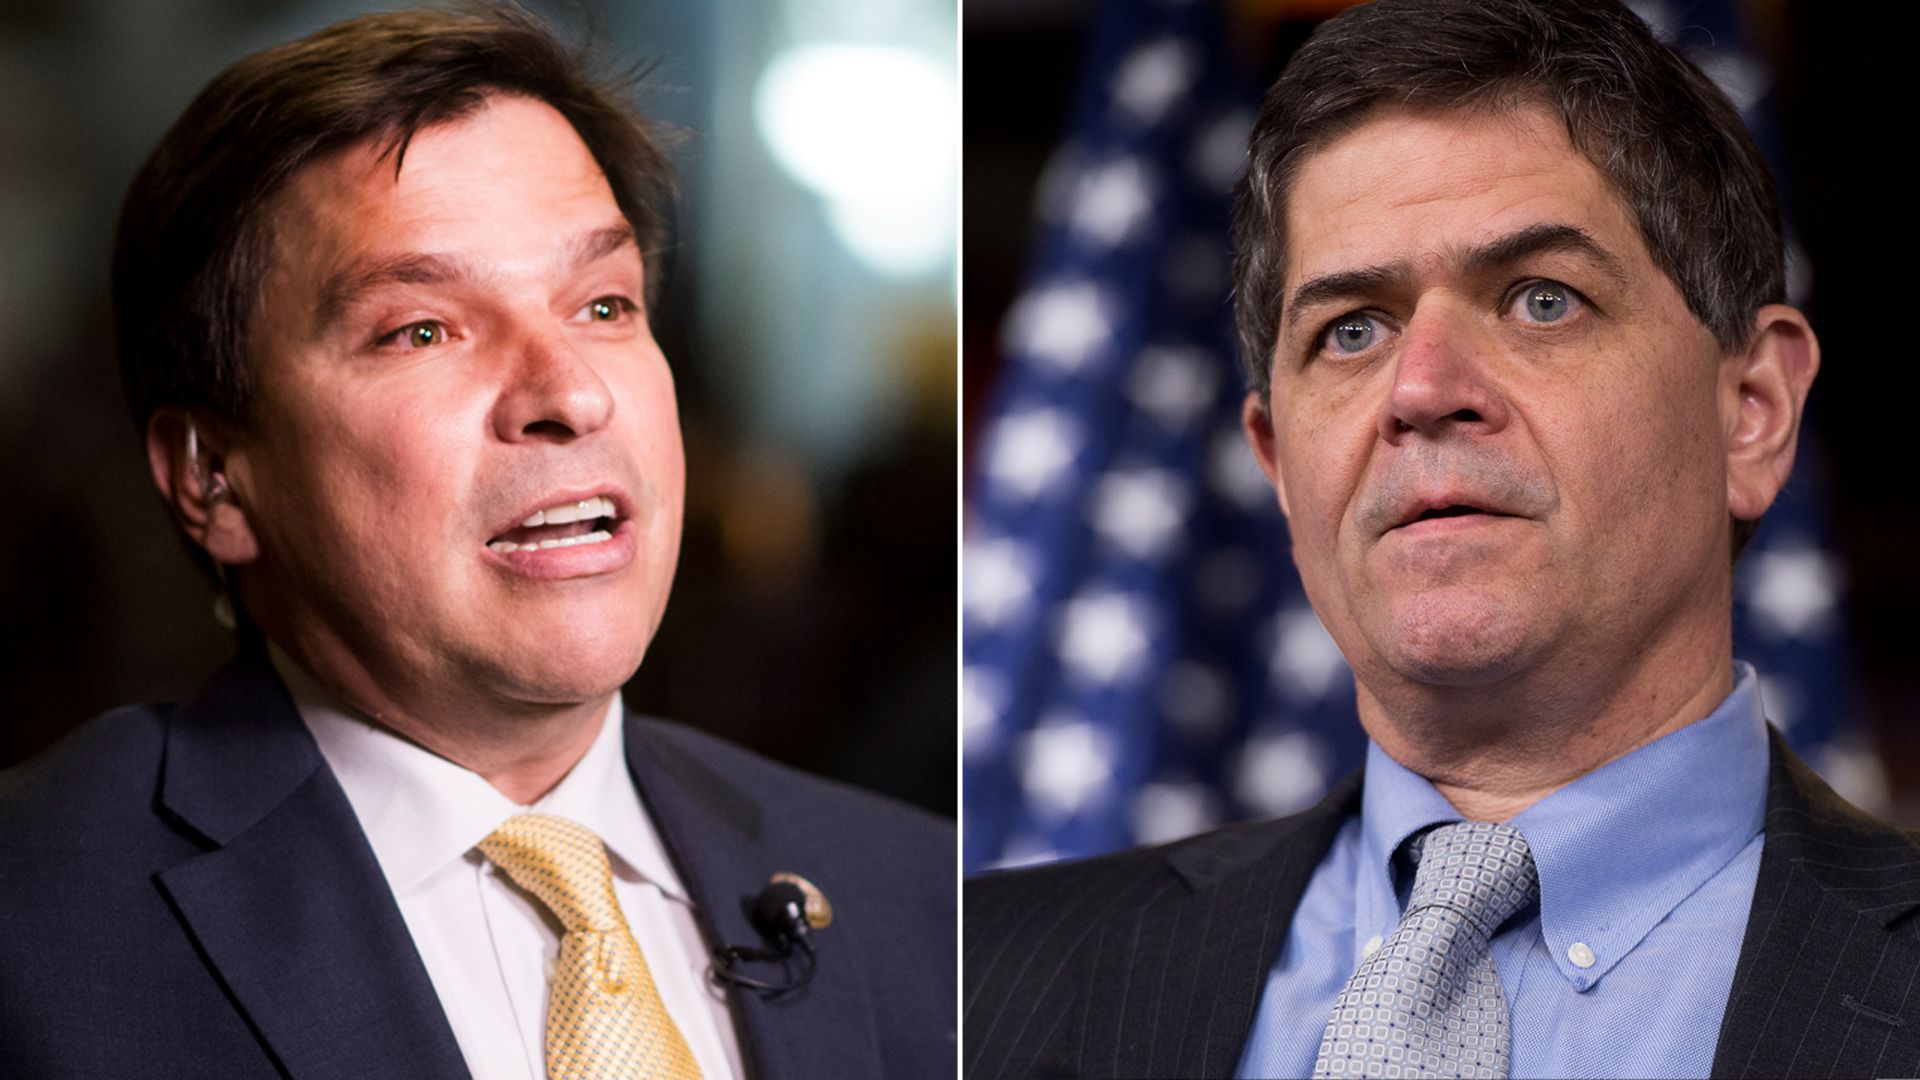 Reps. Vicente Gonzalez and Filemon Vela are seen in a pair of side-by-side headshots.